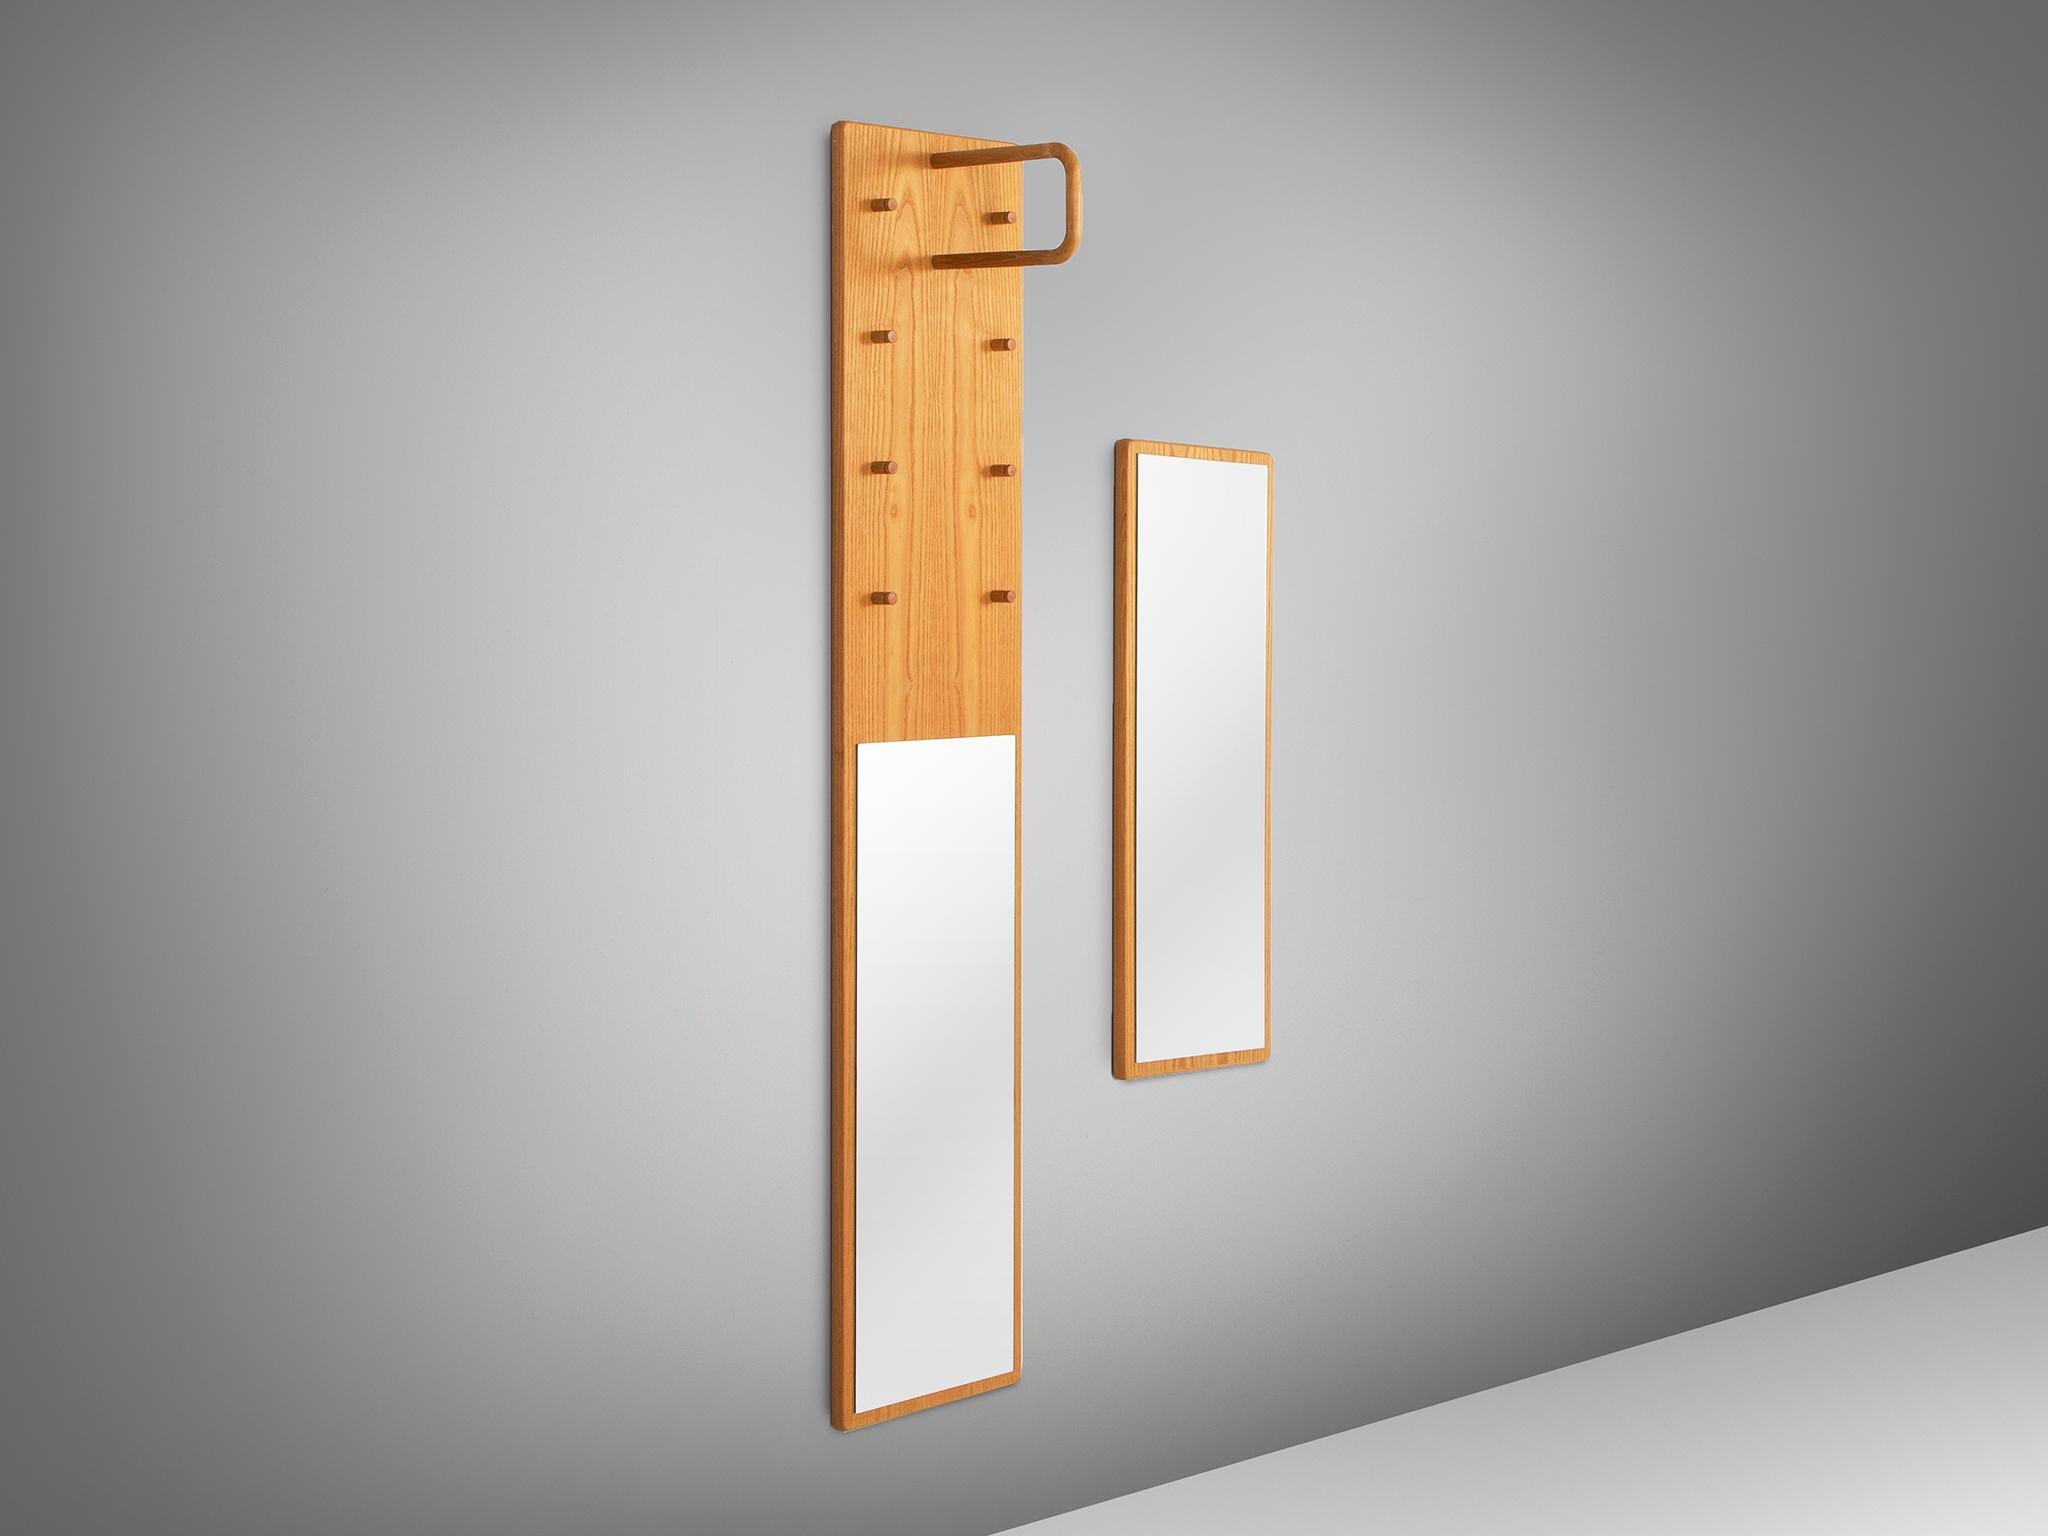 Mirror with coat stand, pine and mirror, Sweden, 1970s

Swedish designed rectangular shaped mirror with a nice coat stand function in pine wood. The design is typical Scandinavian, modest, functional, yet of high quality.
 
